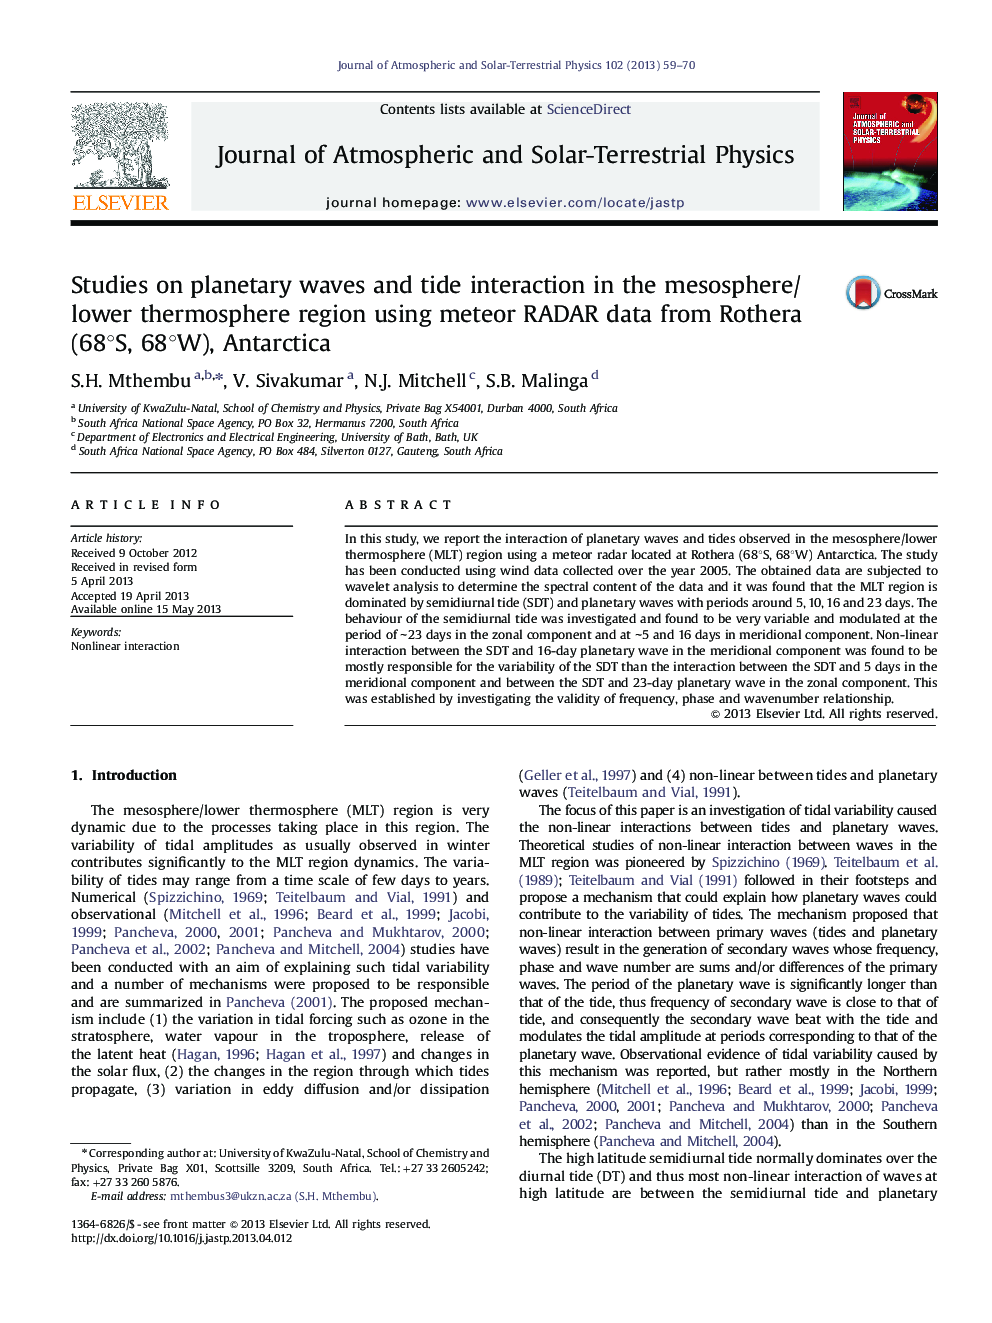 Studies on planetary waves and tide interaction in the mesosphere/lower thermosphere region using meteor RADAR data from Rothera (68Â°S, 68Â°W), Antarctica